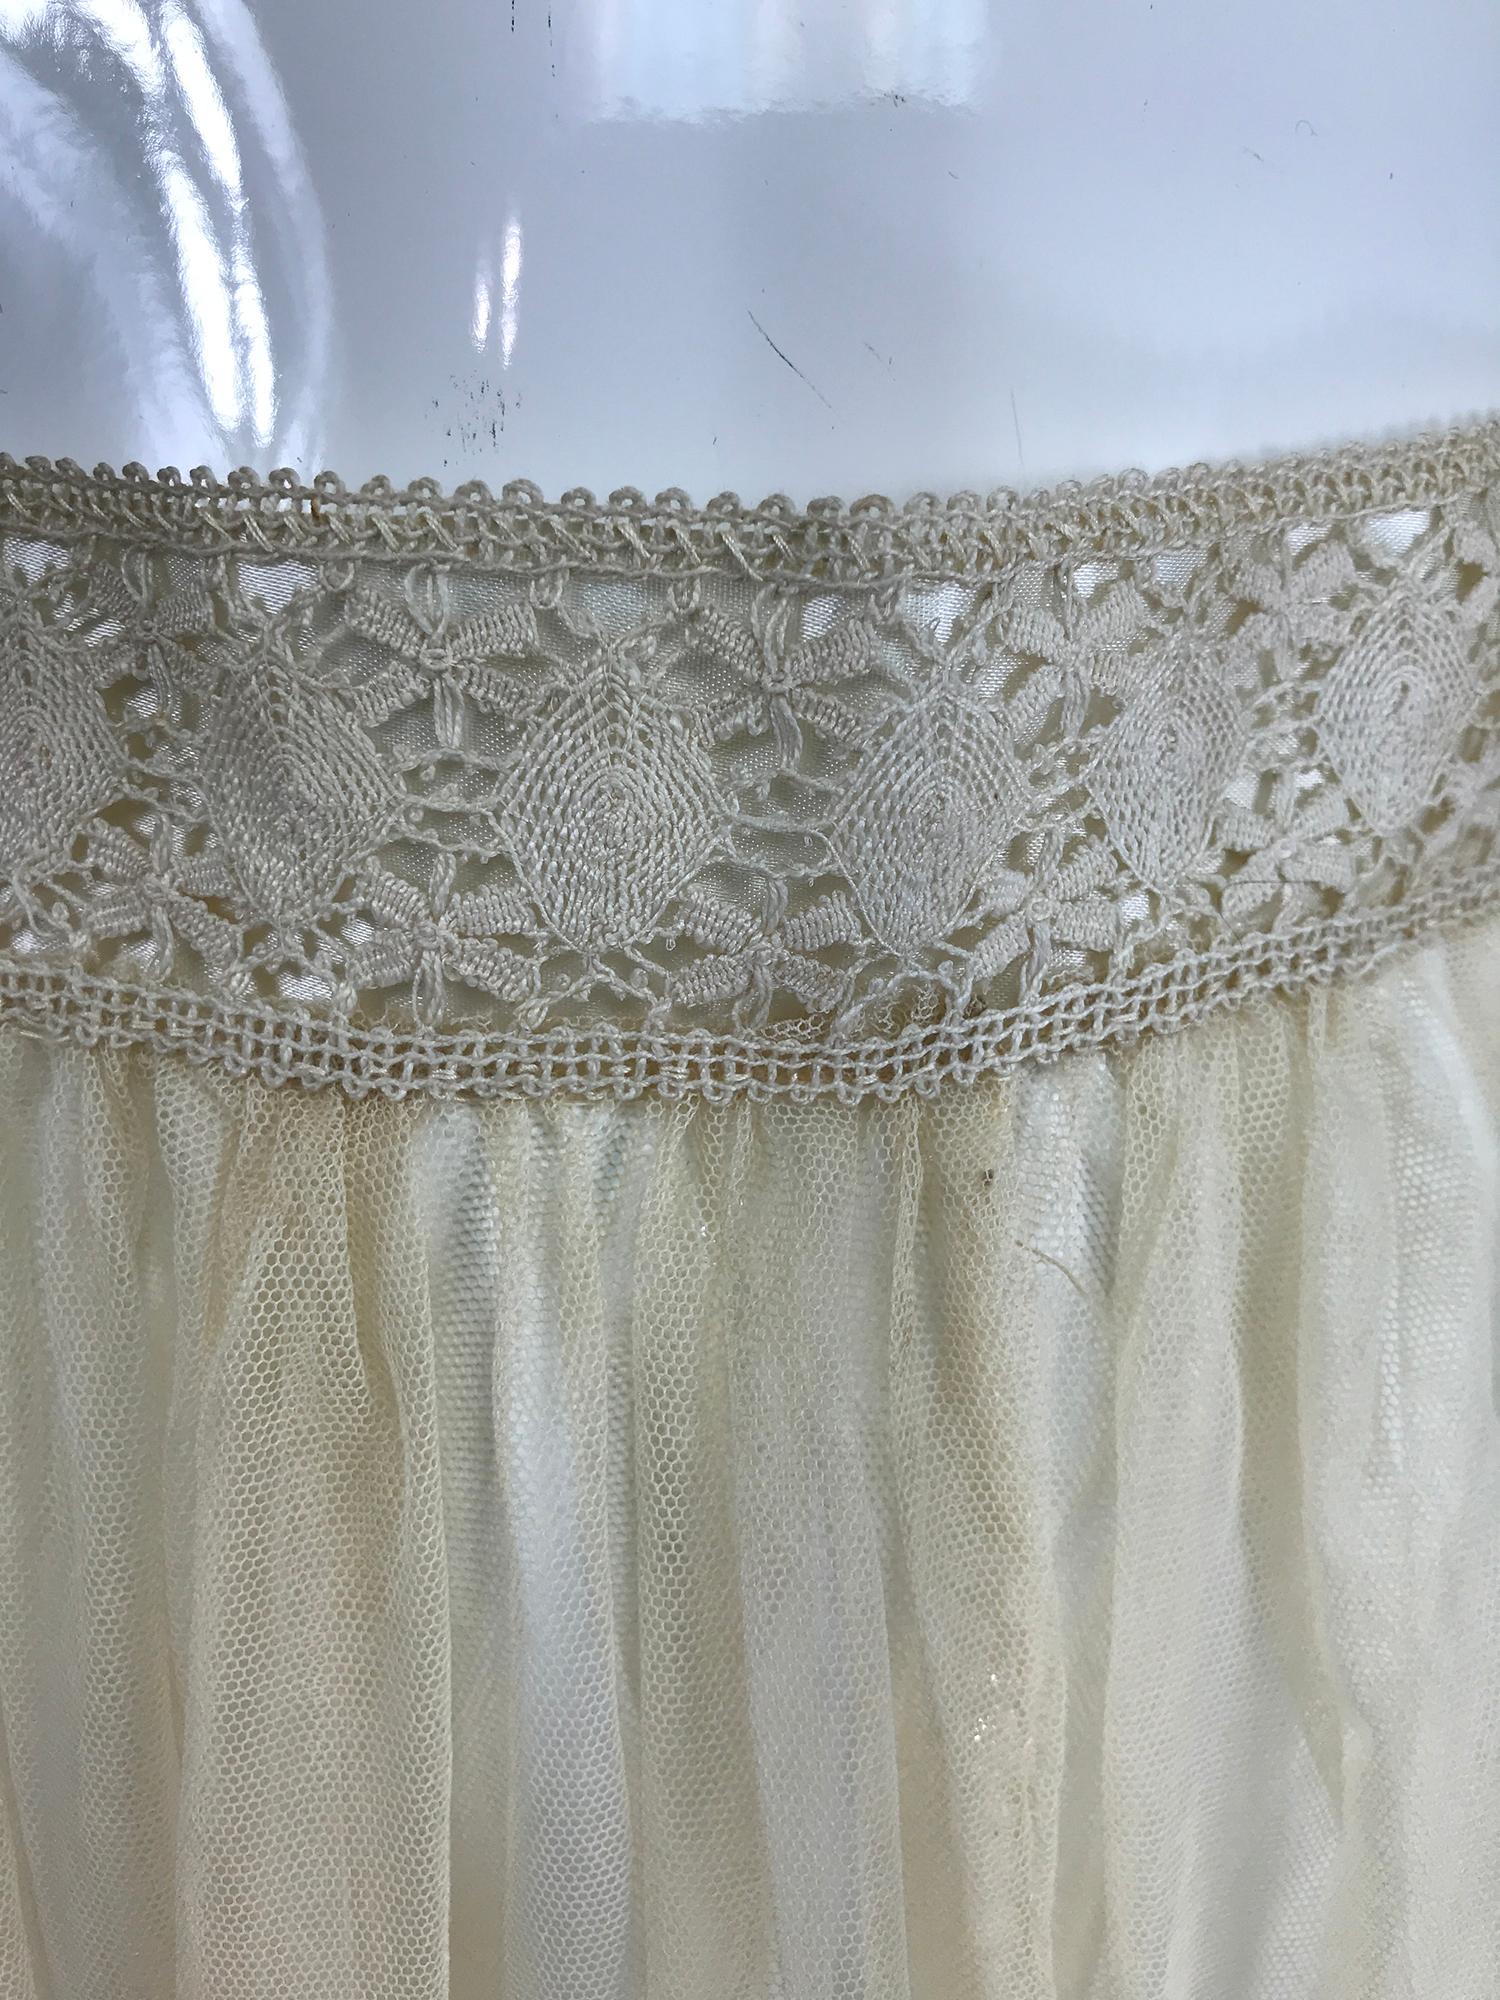 Edwardian Ecru Satin Stitch Embroidered Tulle Skirt 1900s For Sale at ...